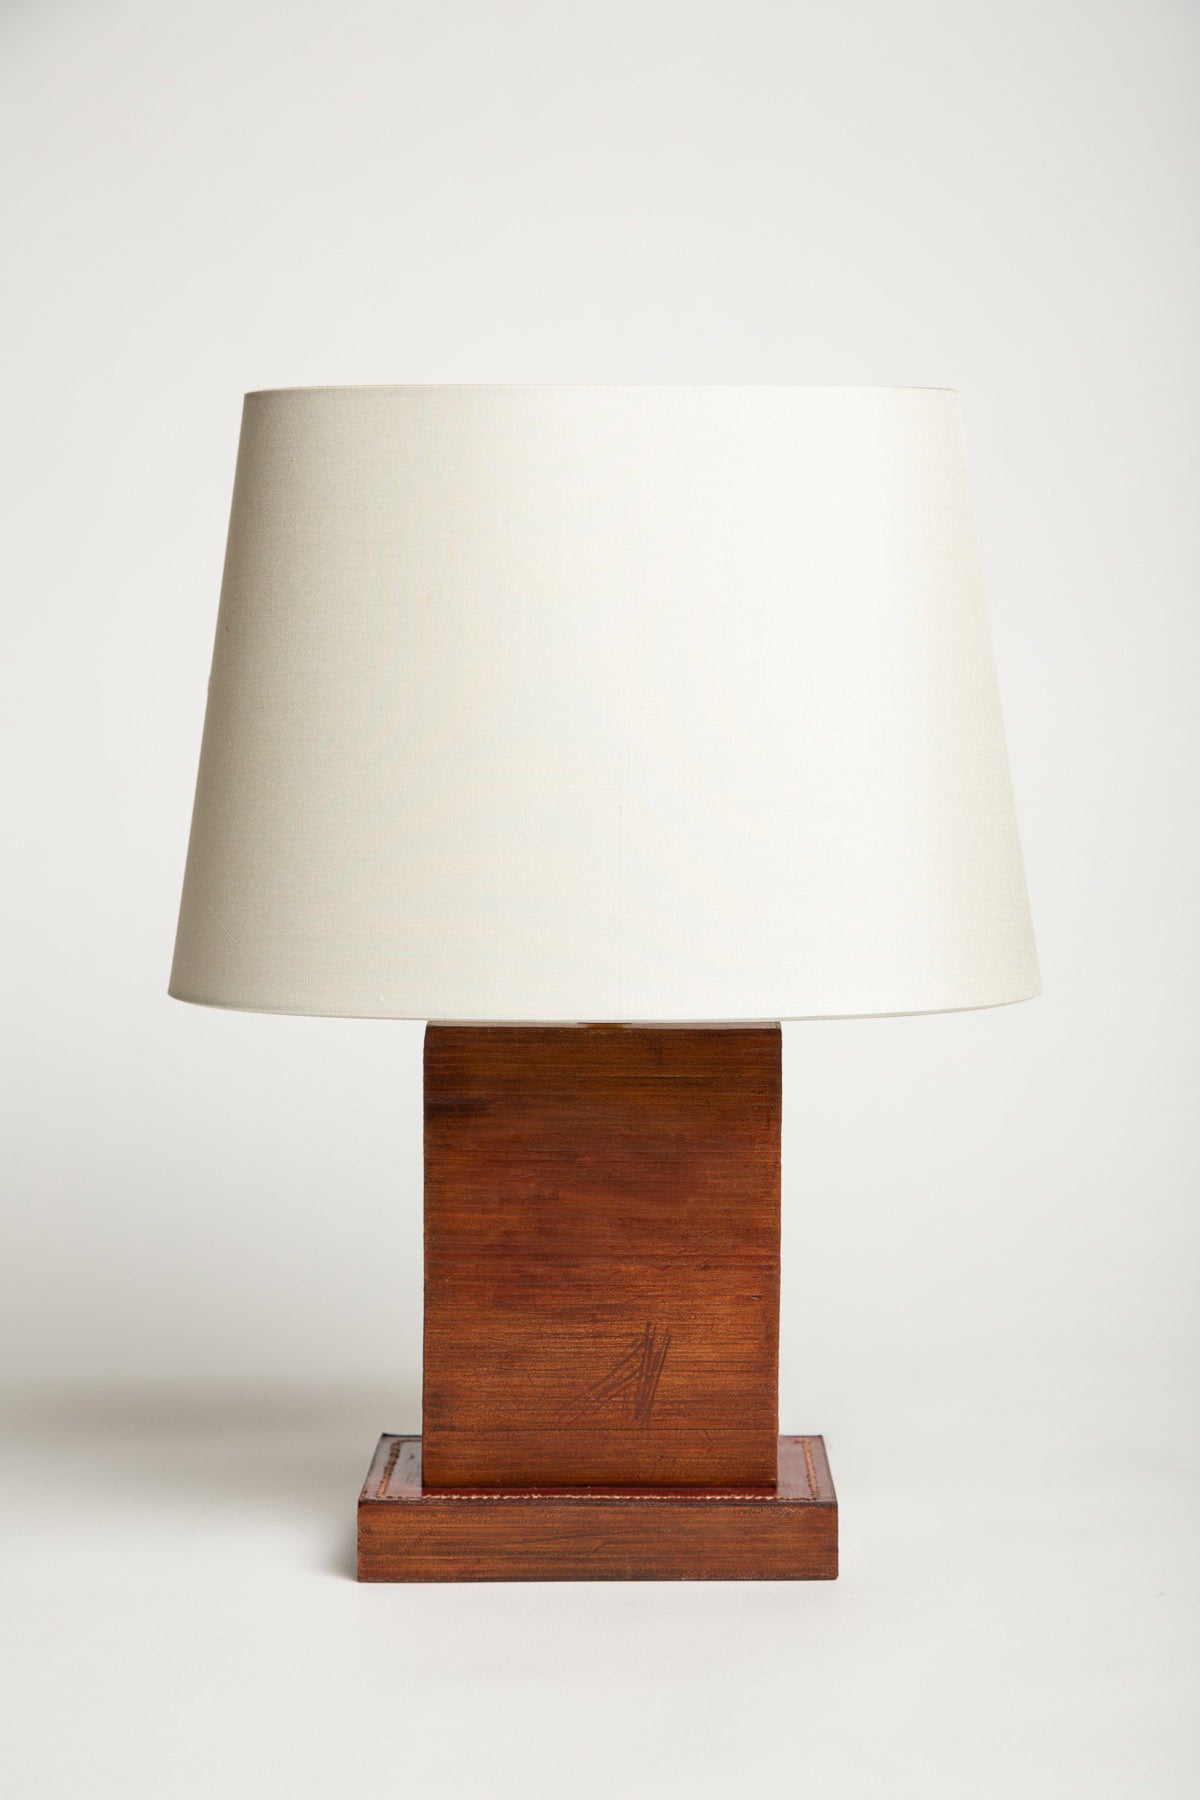 HERMÈS | STITCHED LEATHER TABLE LAMP